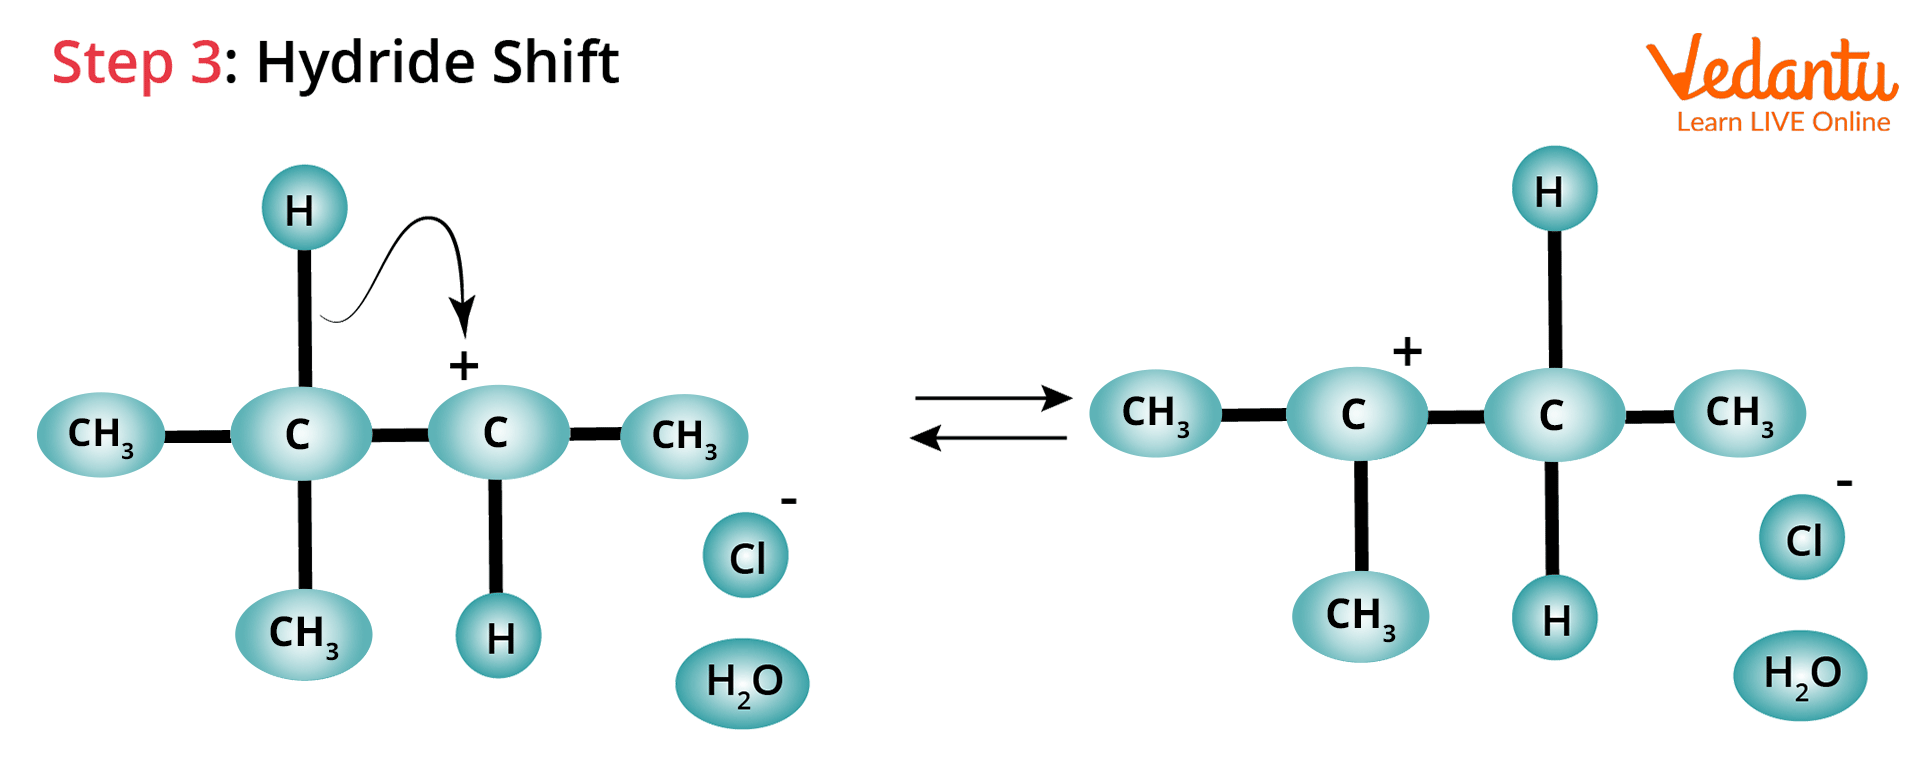 Hydride shift rearrangement of carbocation- hydride shift